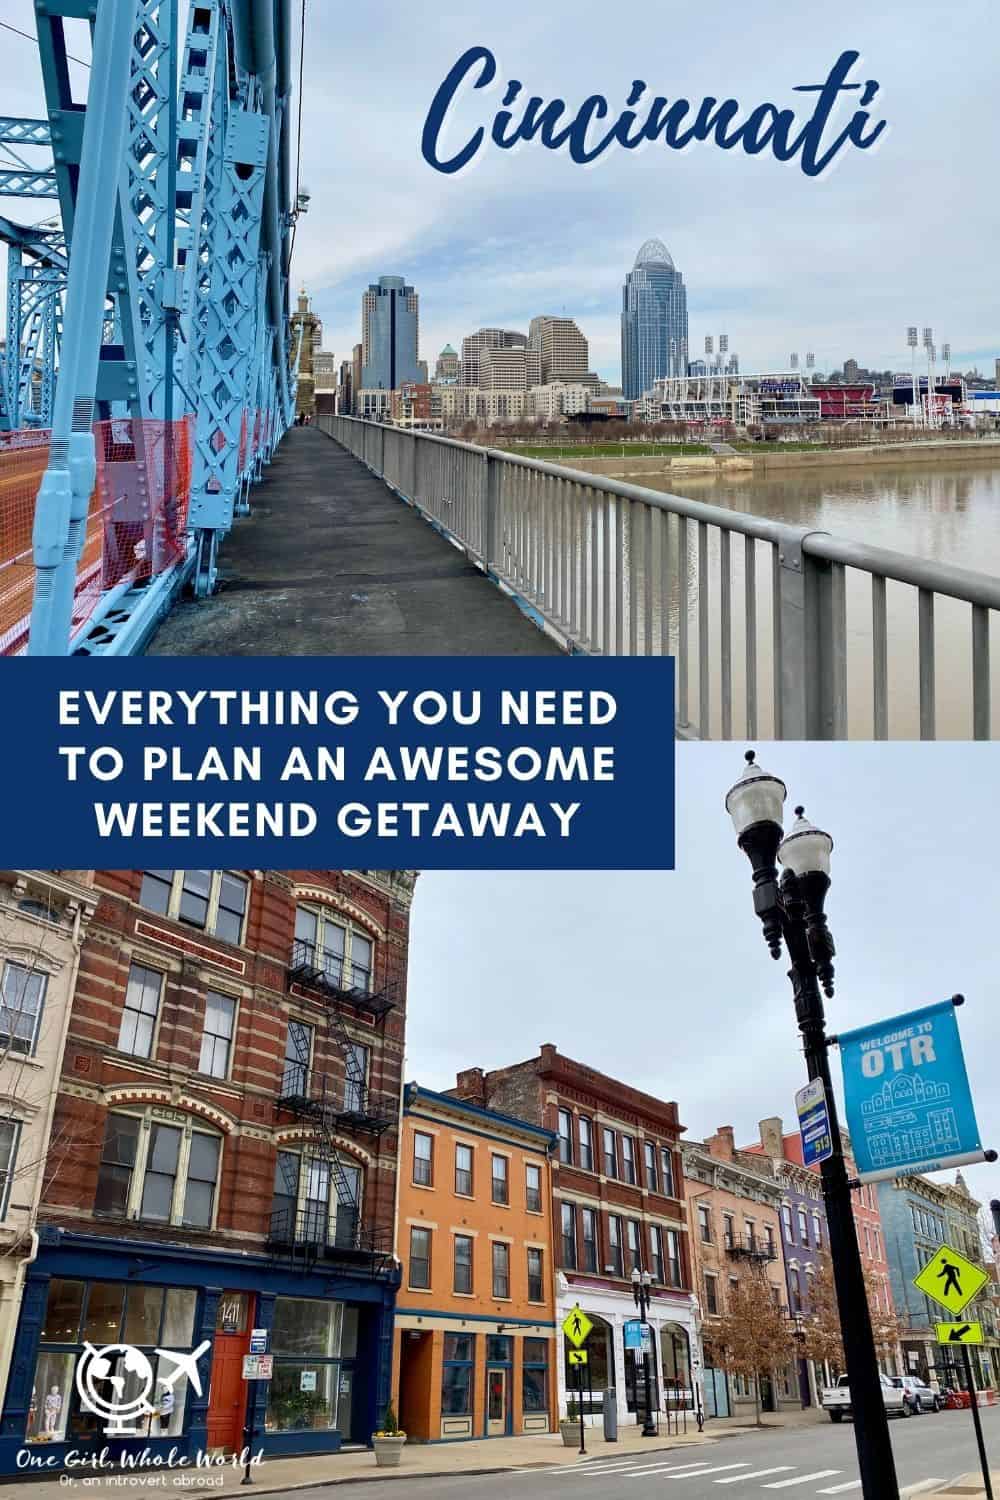 Things to Do in Cincinnati, Ohio | How to plan a Cincinnati weekend trip packed full of beautiful architecture, history, great food and drink, breweries, riverfront views, & more! Where to stay in Cincinnati, restaurant & bar recommendations, Cincinnati architecture, OTR area, Brewery District, historic downtown explorations. #weekendtrip #cincinnati #ohio